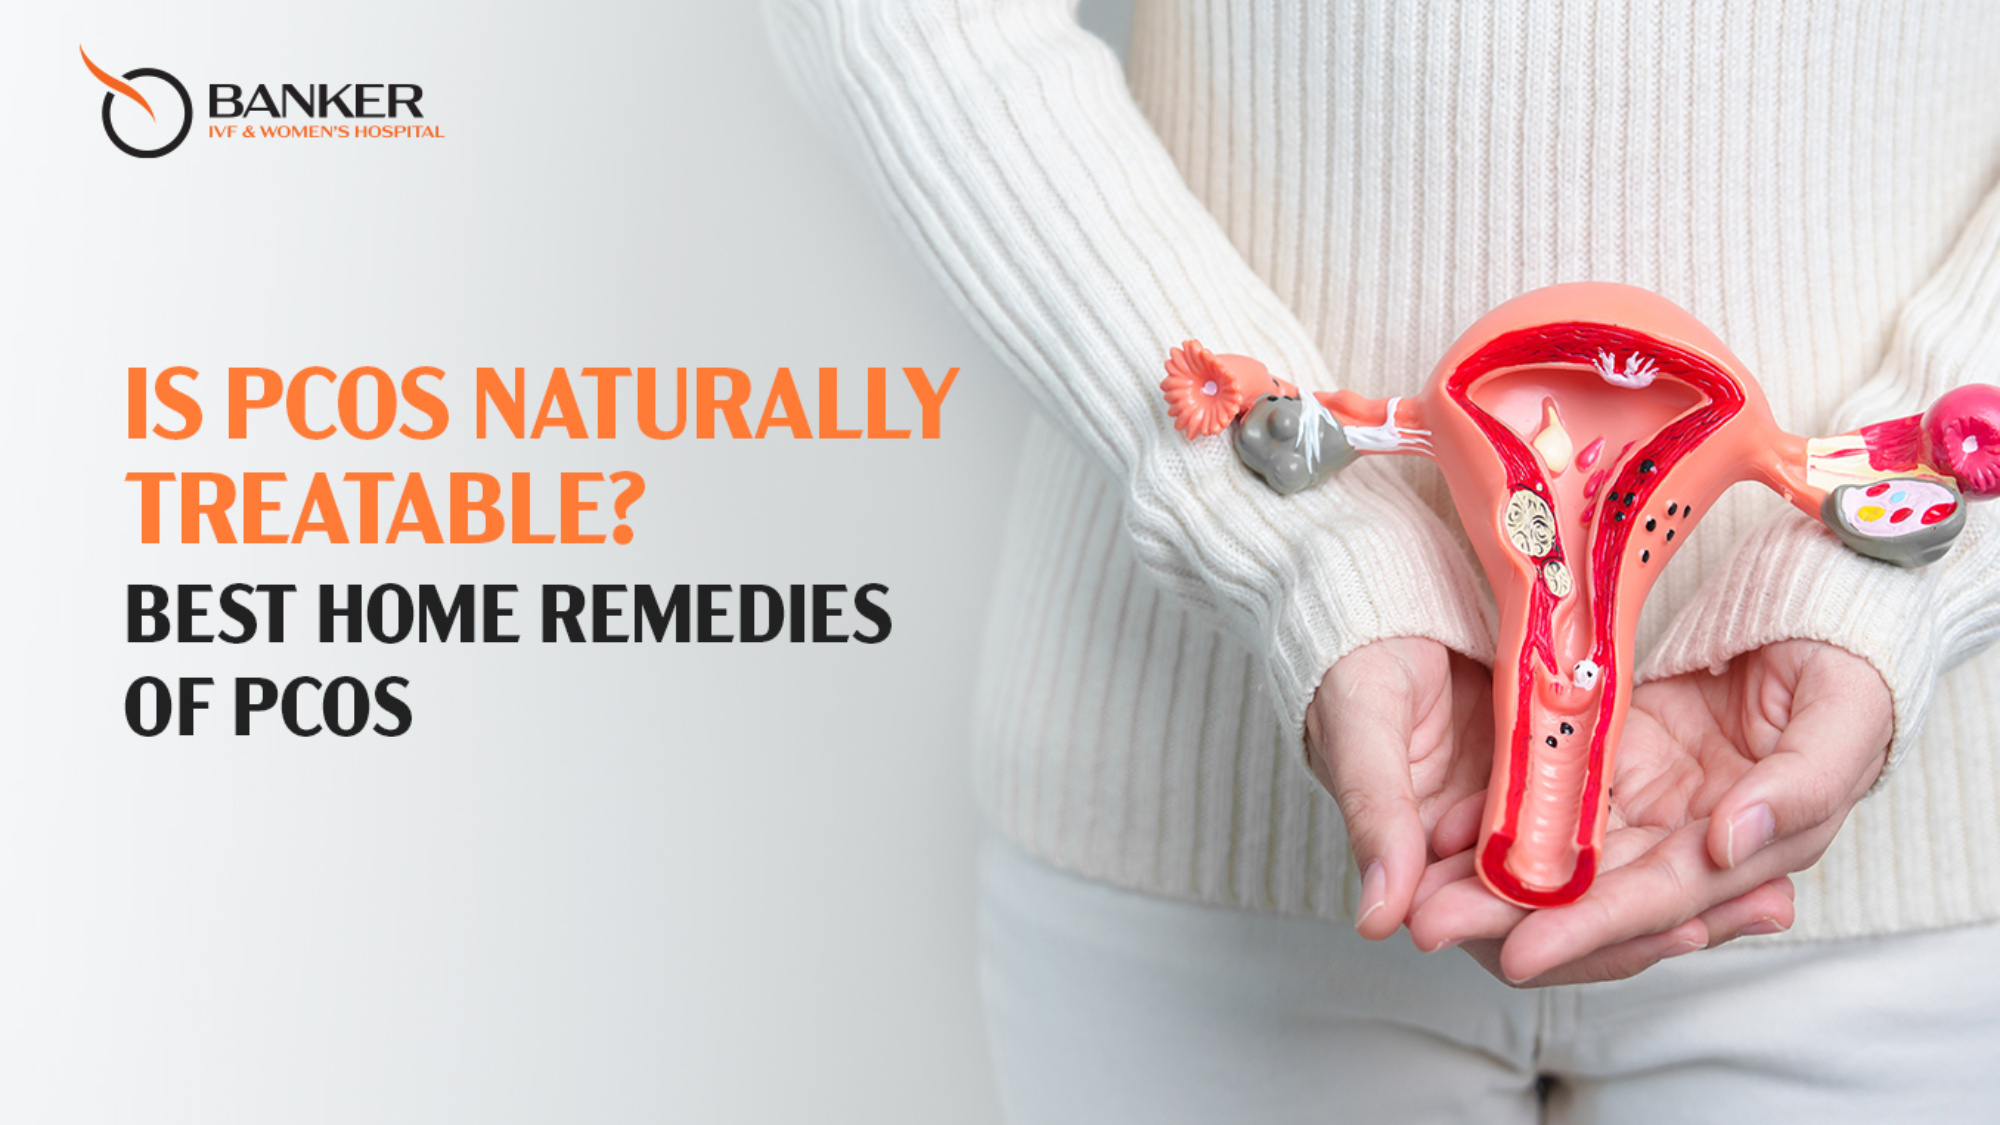 Best Home Remedies Of PCOS